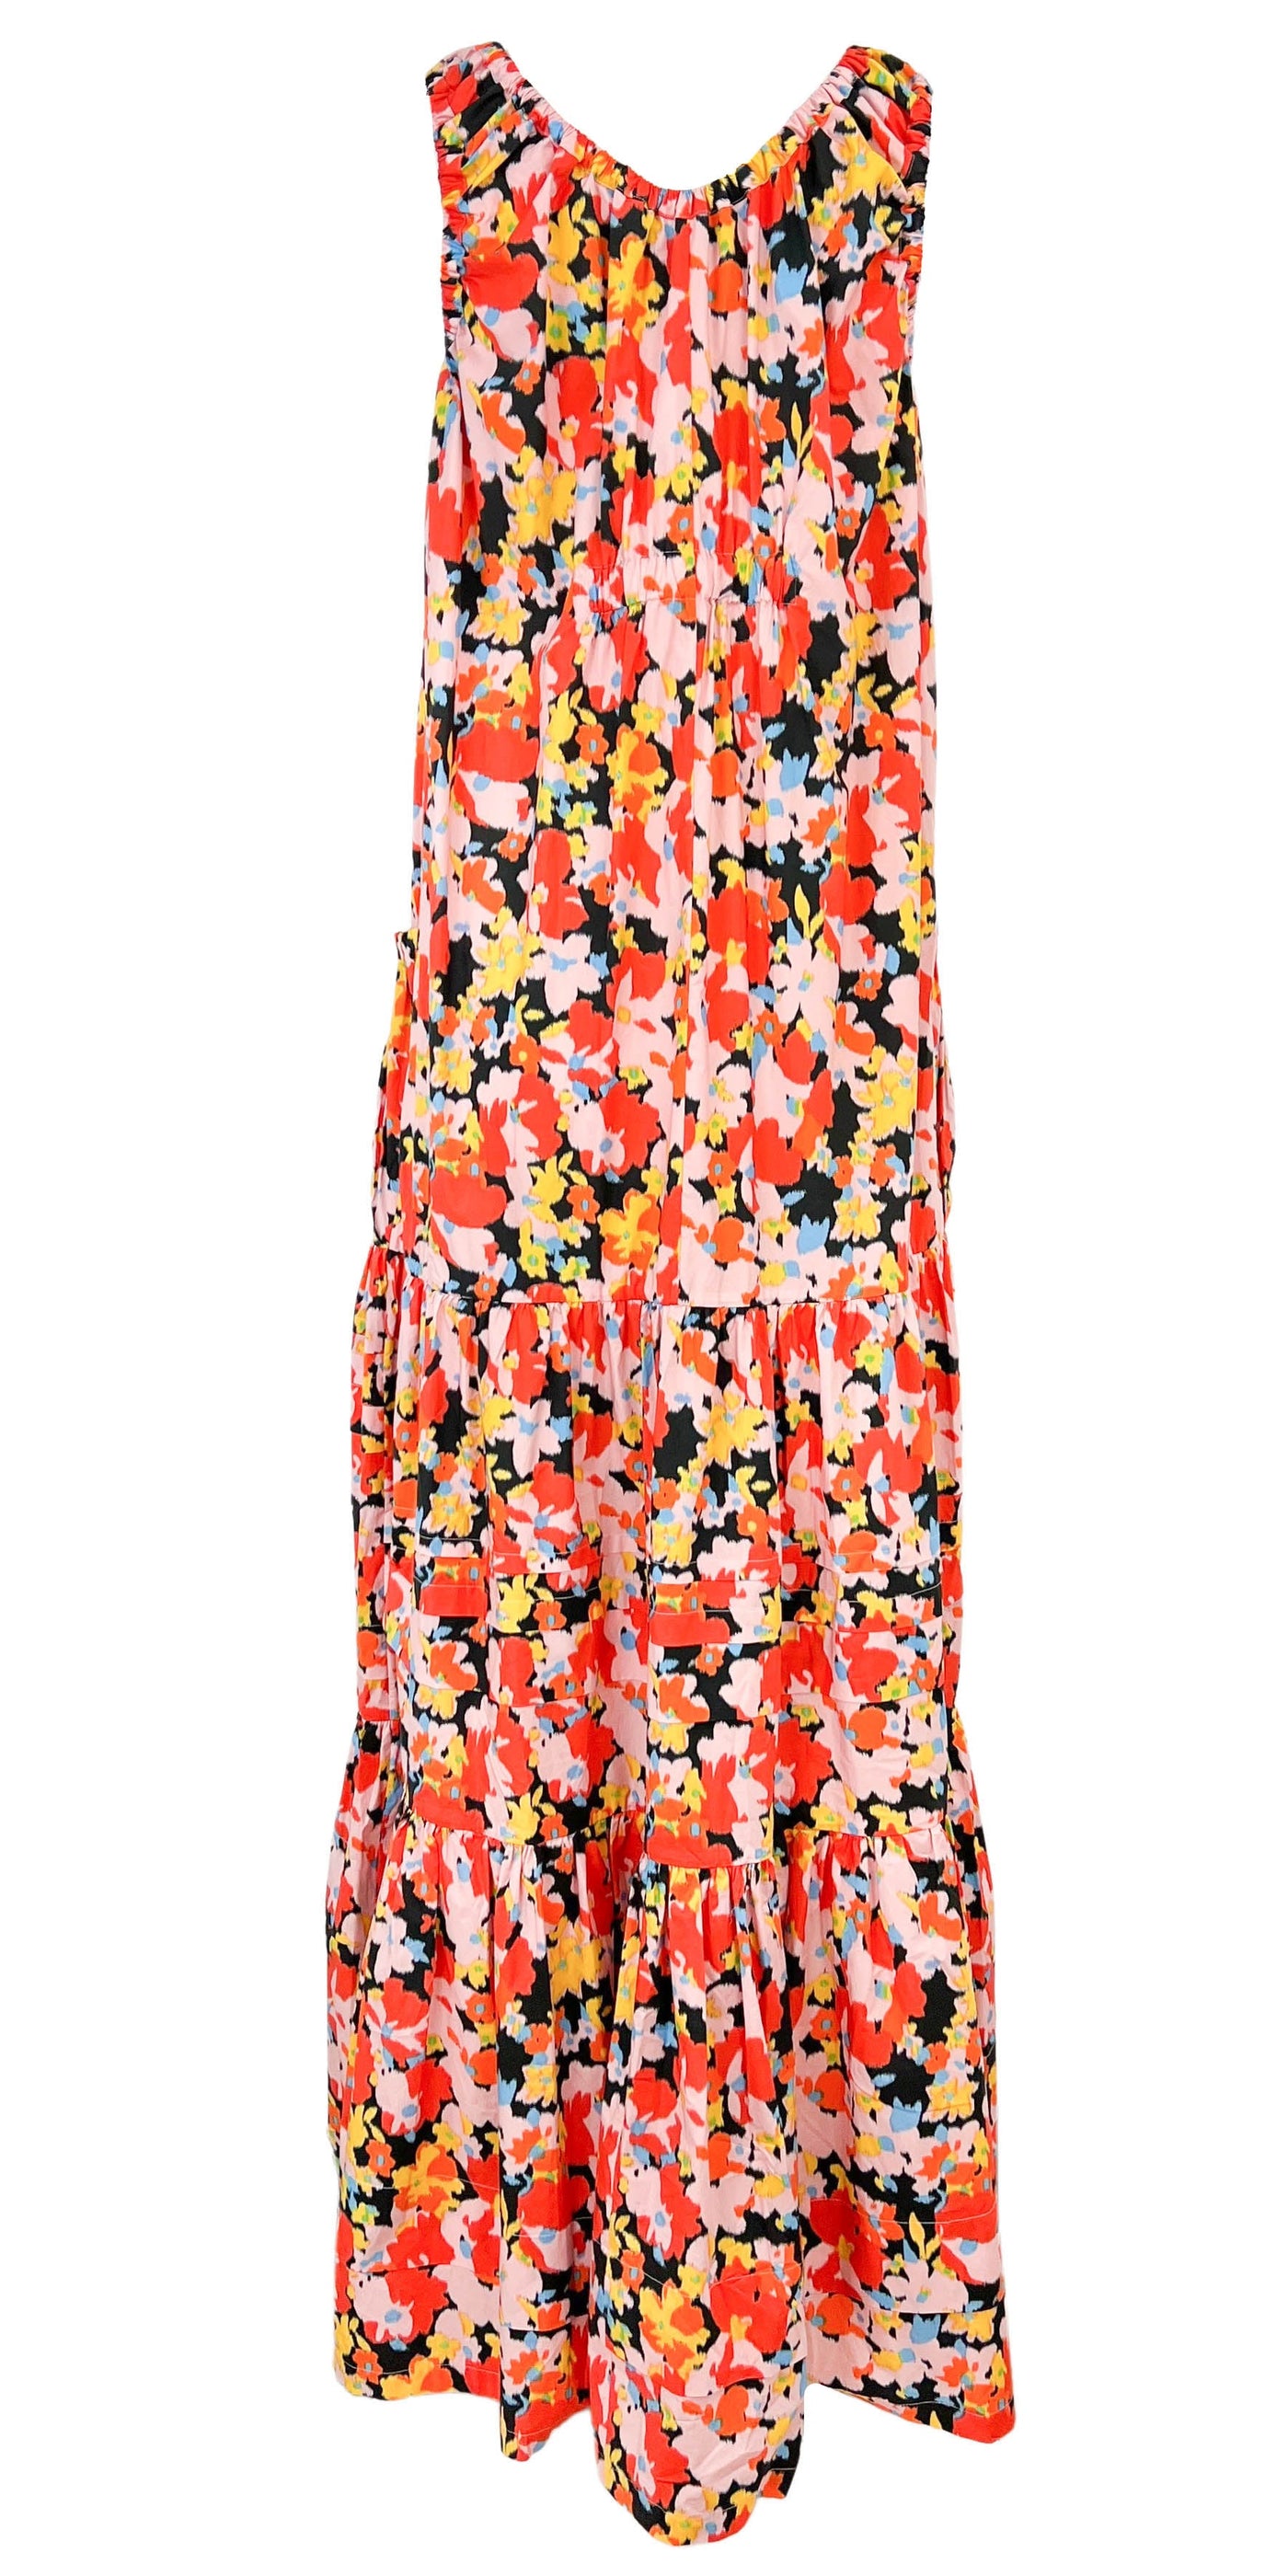 Plan C Maxi Dress in Ikat Flowers - Discounts on Plan C at UAL